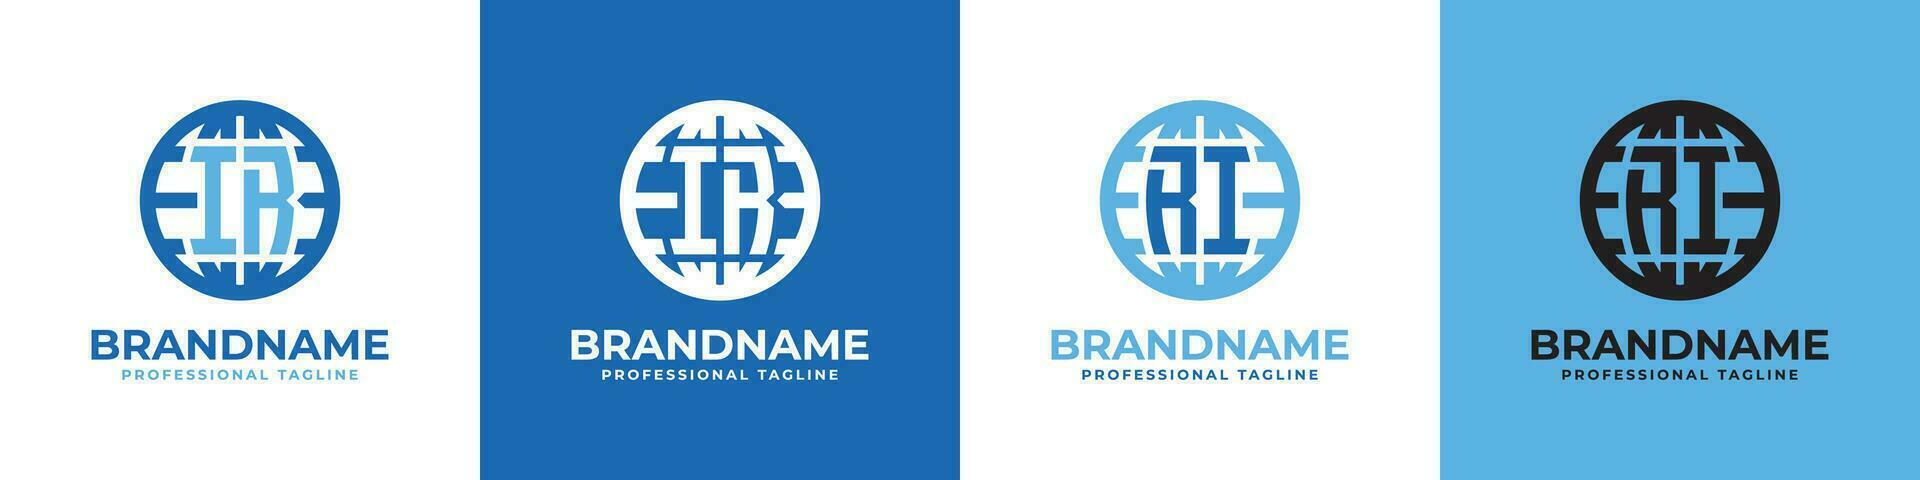 Letter IR and RI Globe Logo Set, suitable for any business with IR or RI initials. vector